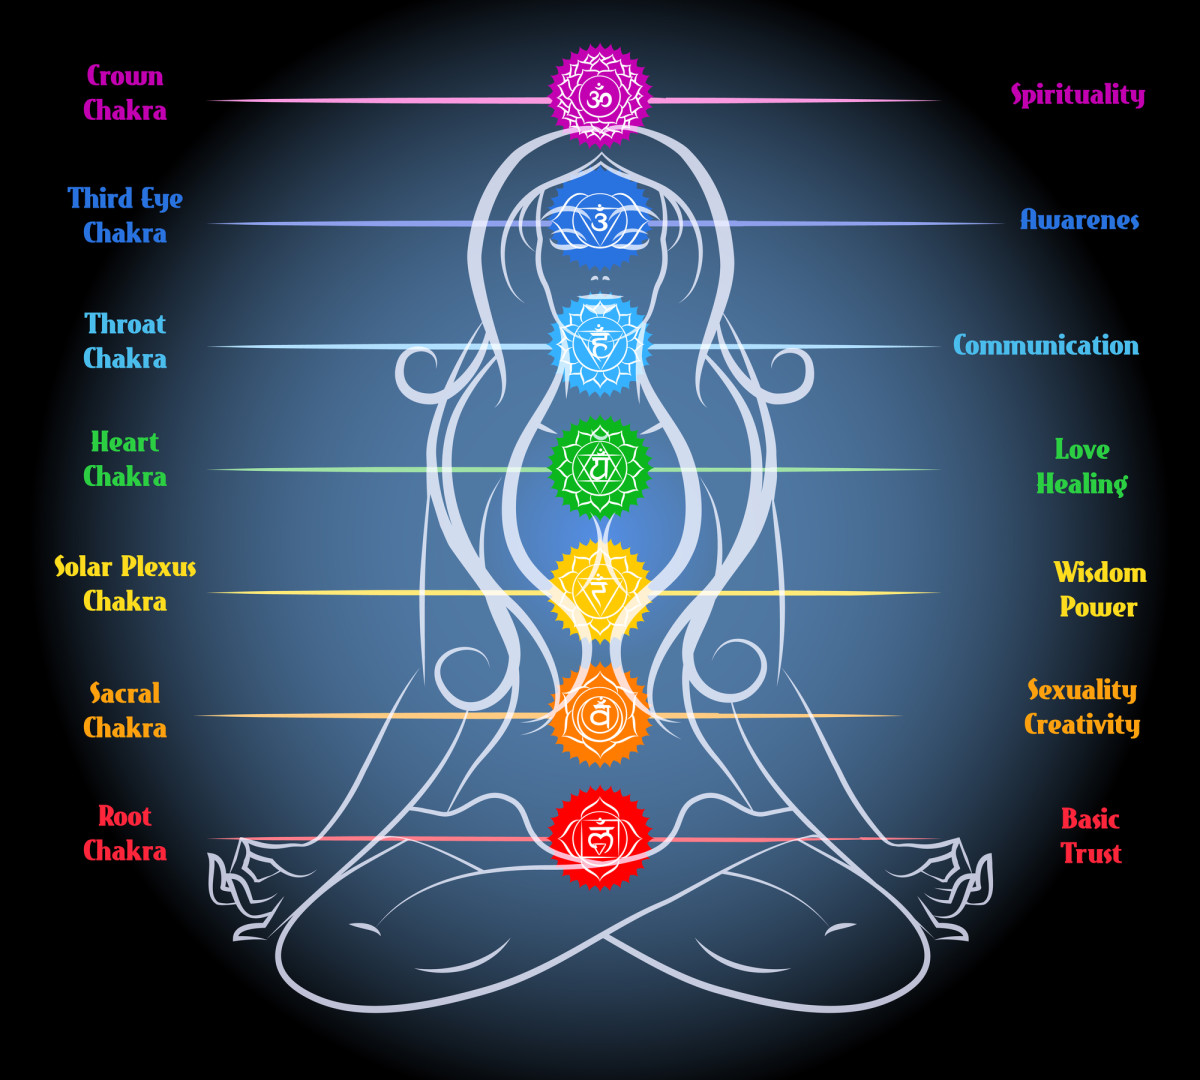 Each chakra resonates with a different color and sound, has its own function, and is related to specific organs in the body.